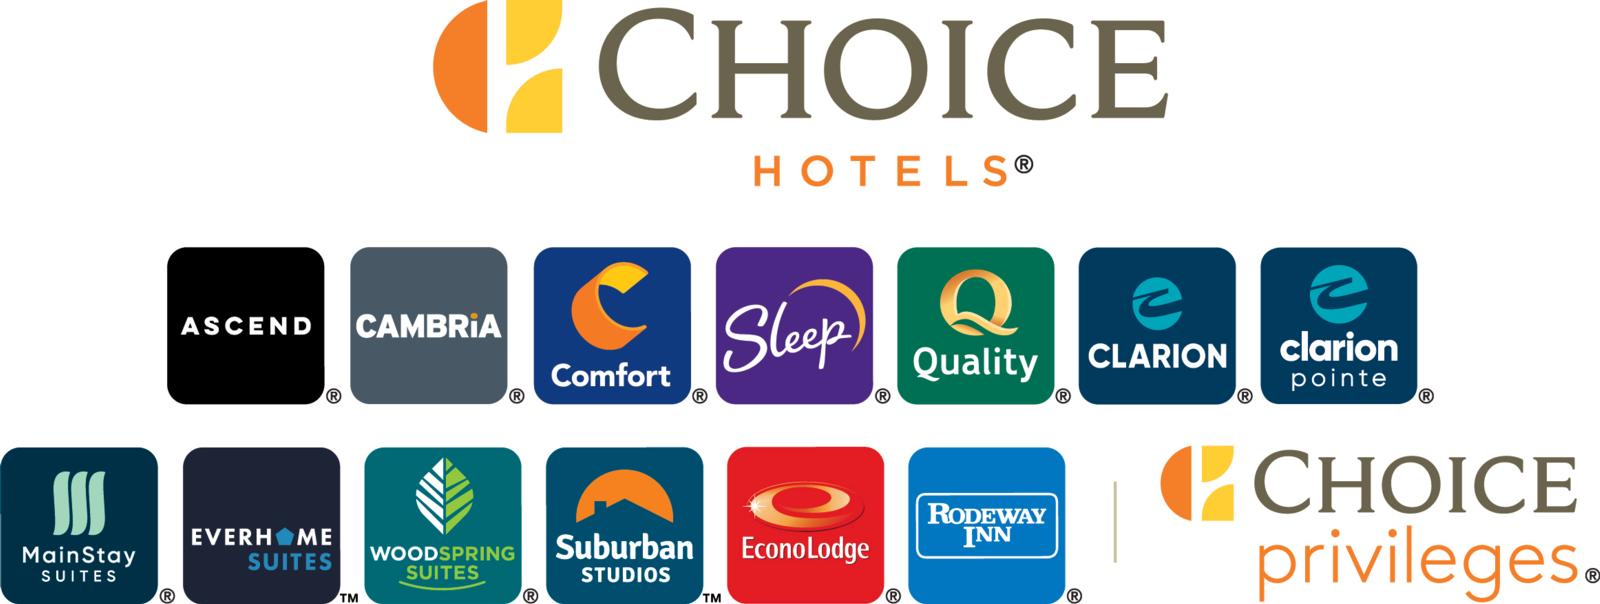 choice hotels locations